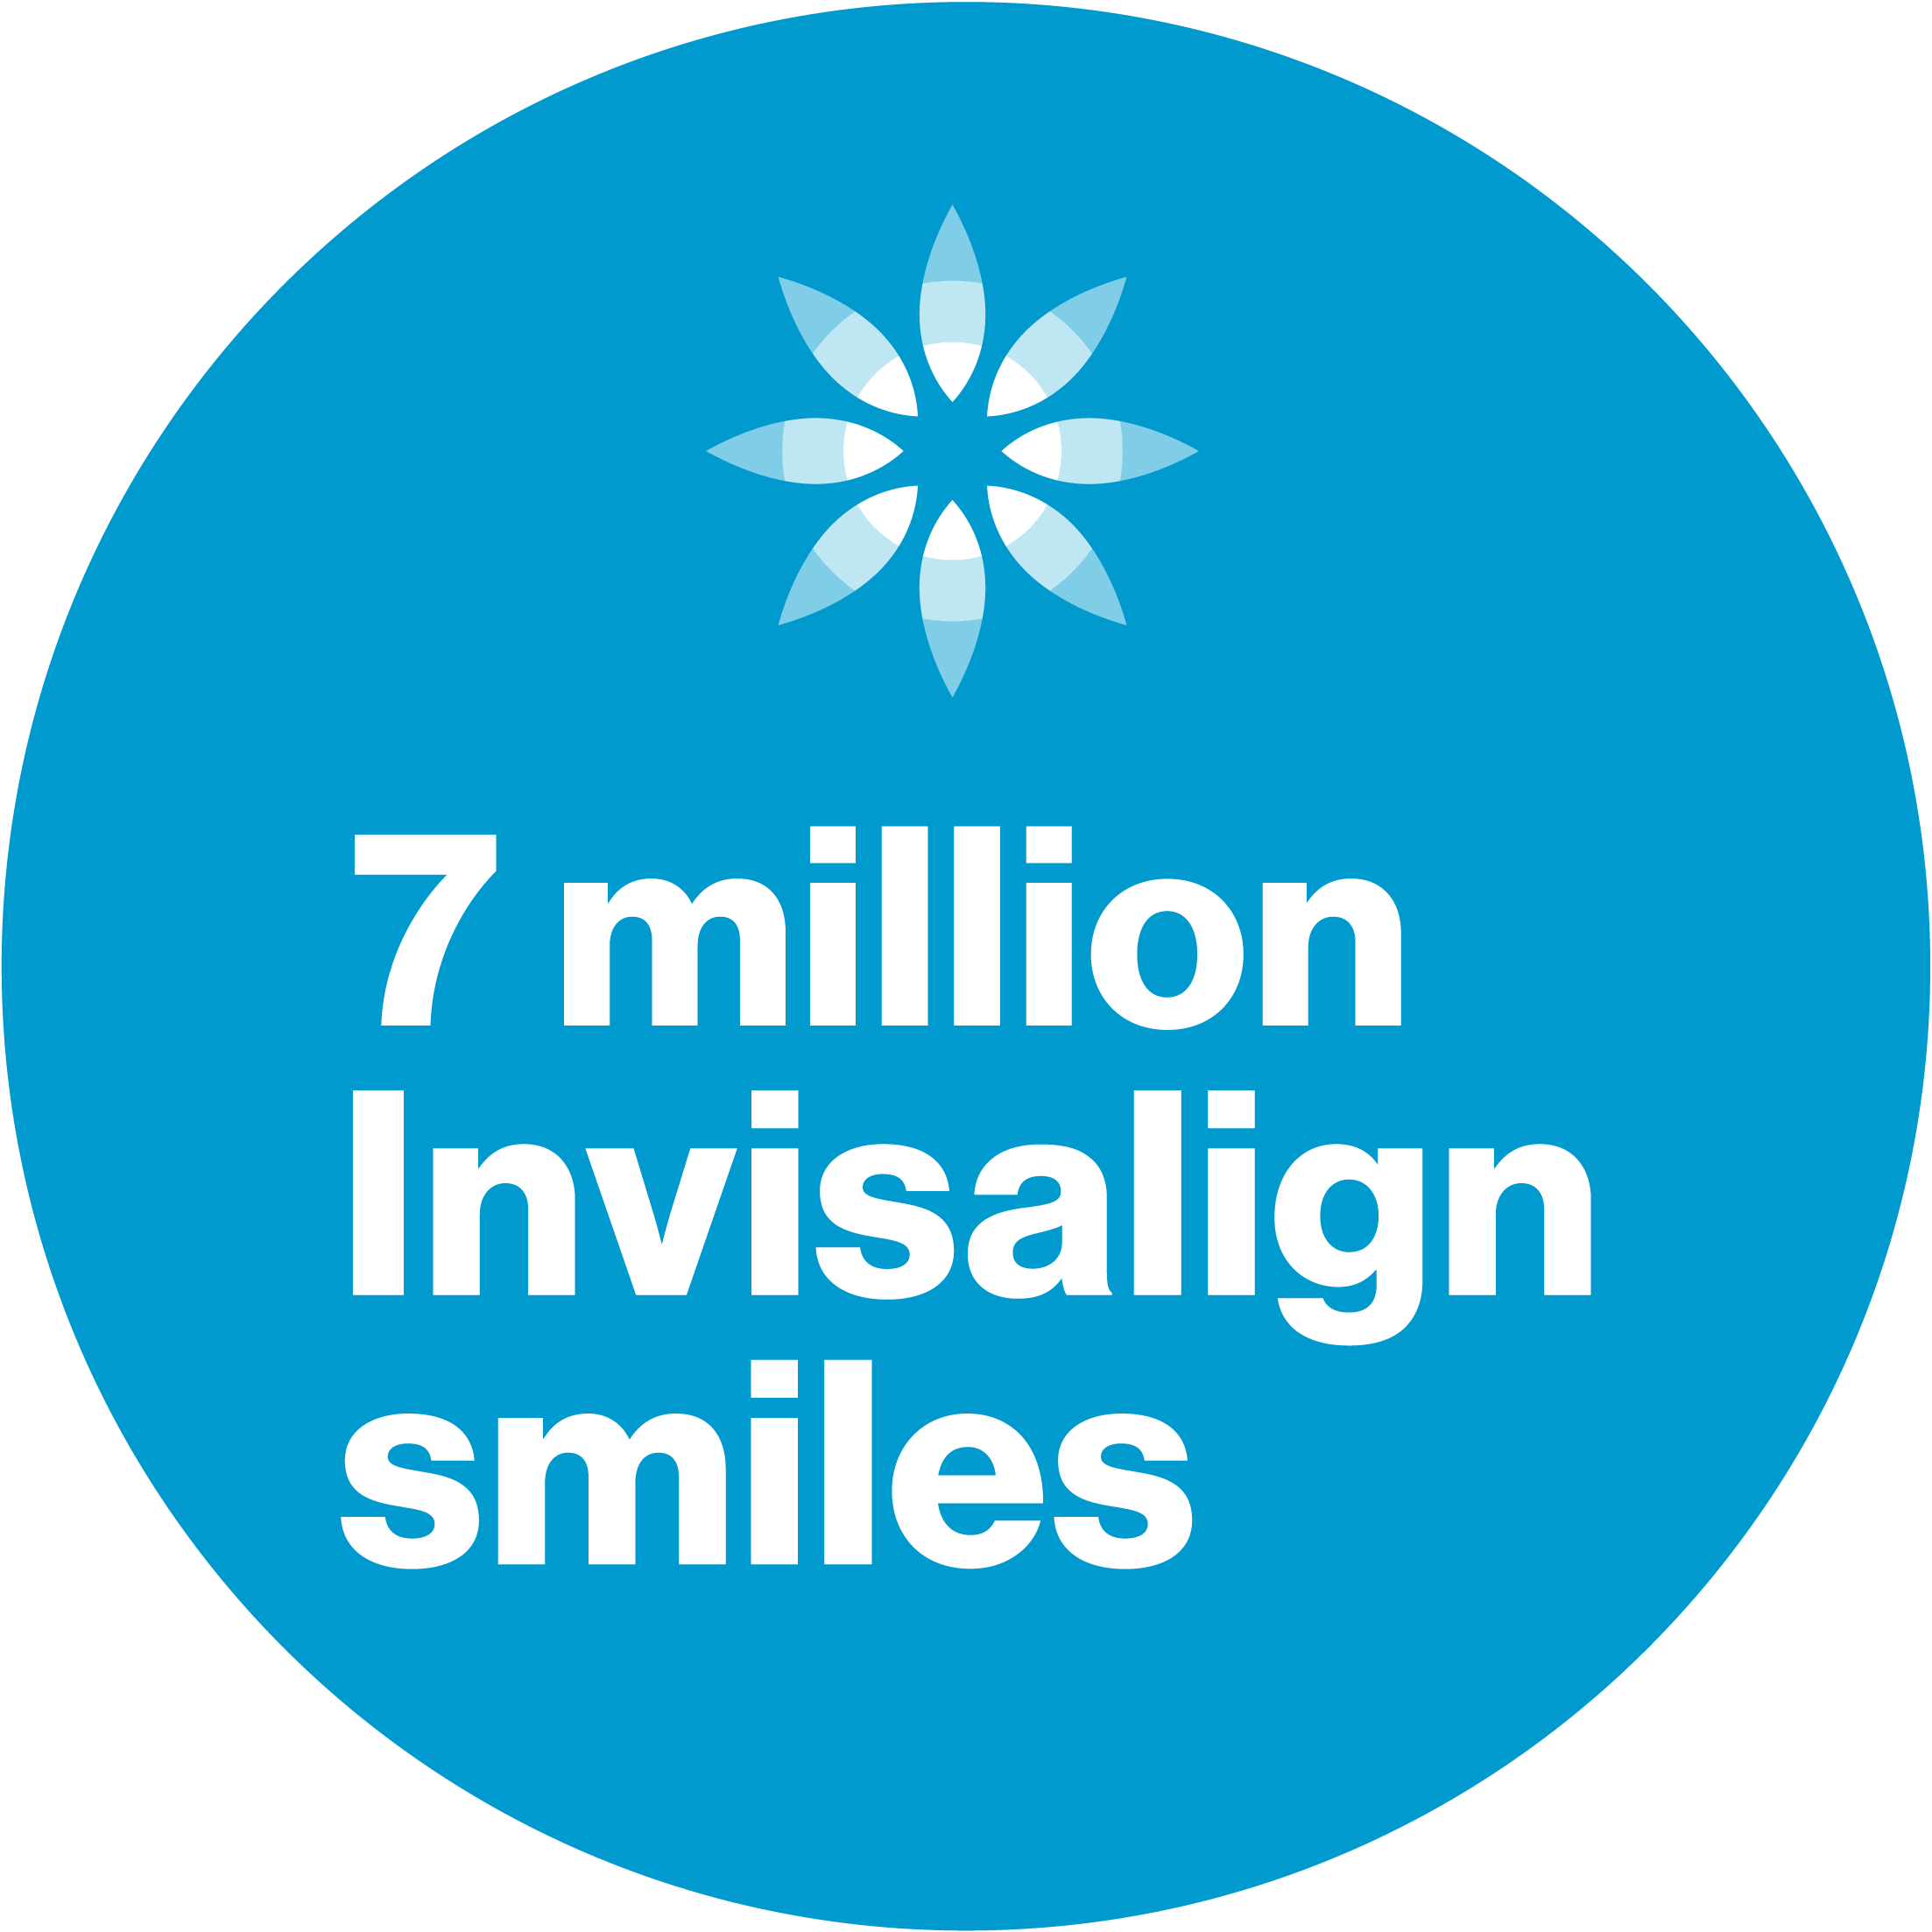 Invisalign Brasil GIFs on GIPHY - Be Animated